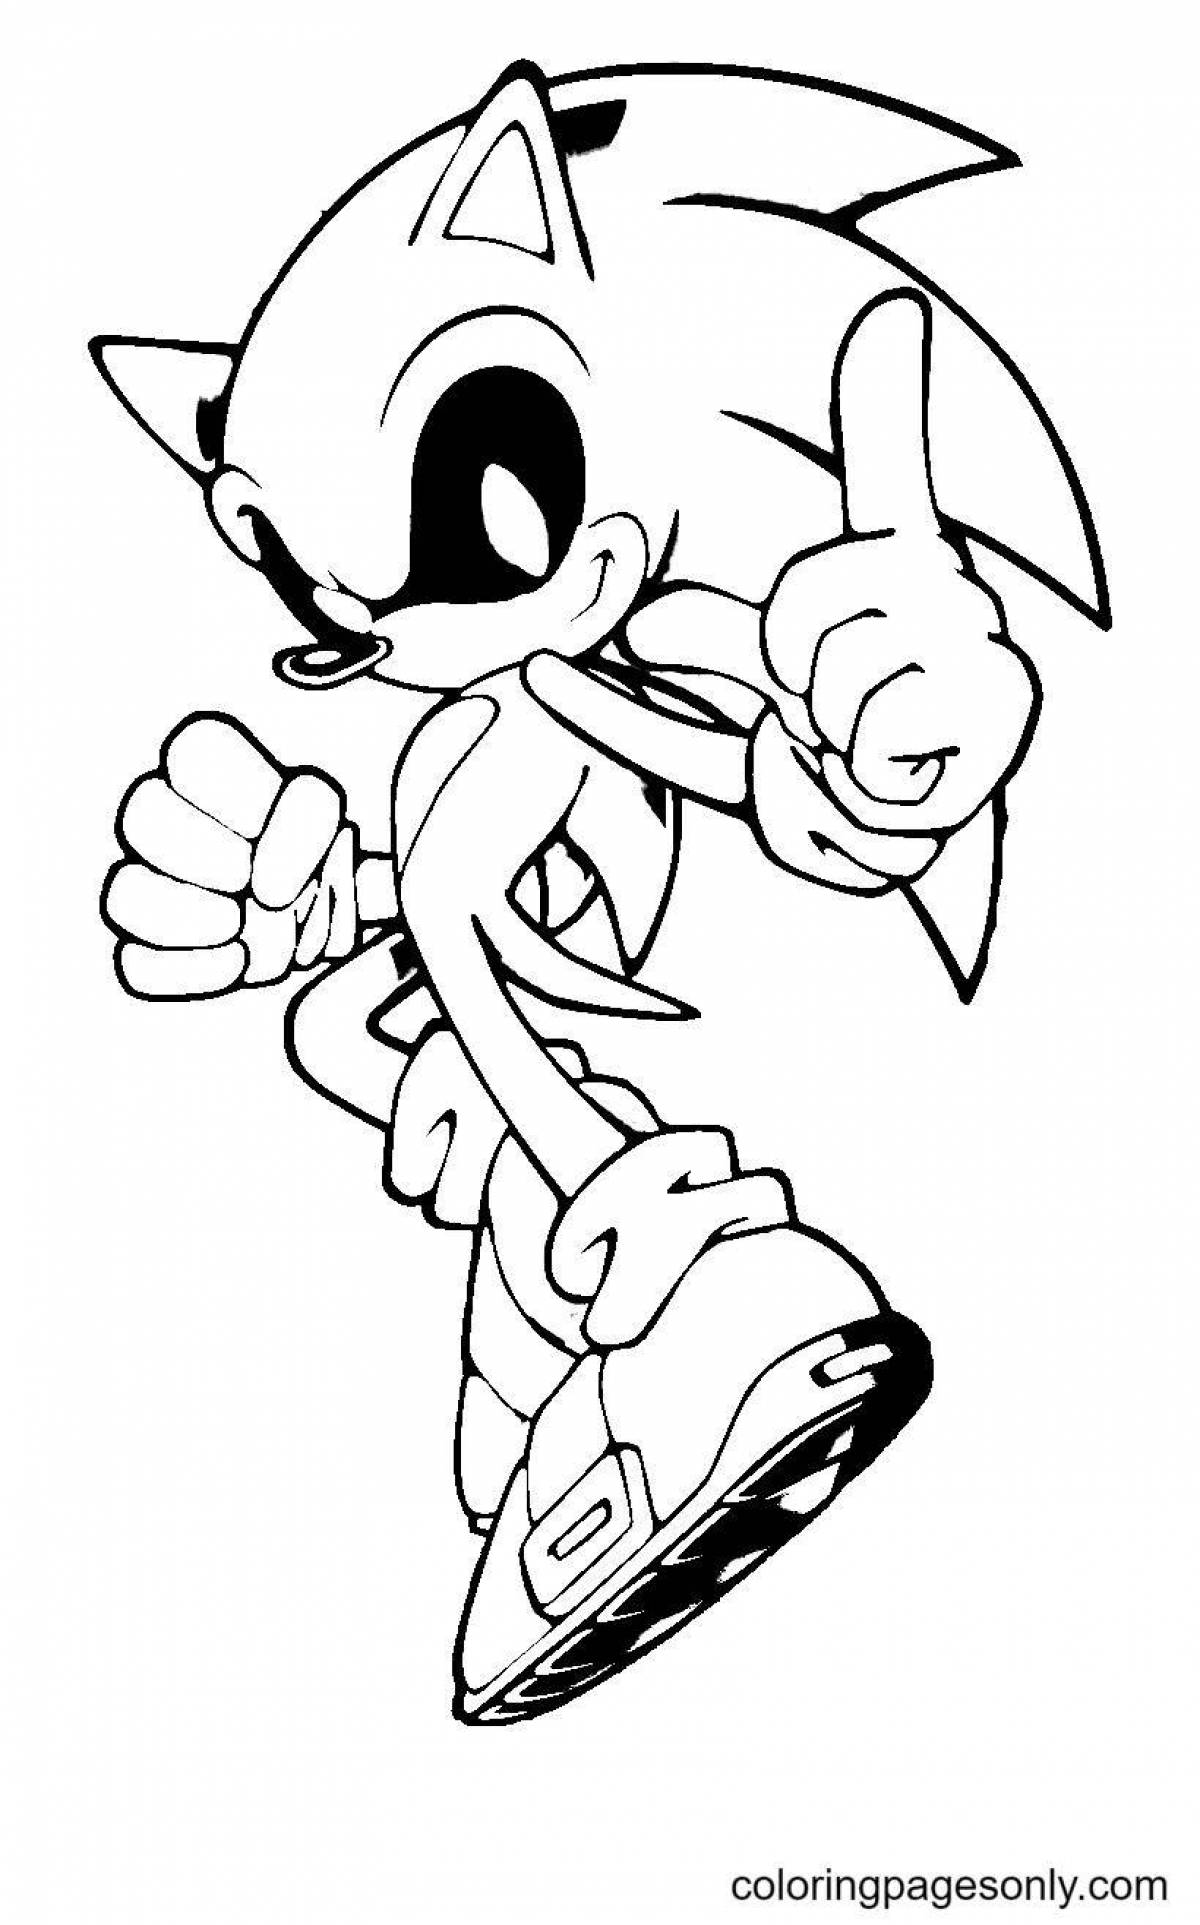 Attractive sonicexe coloring book